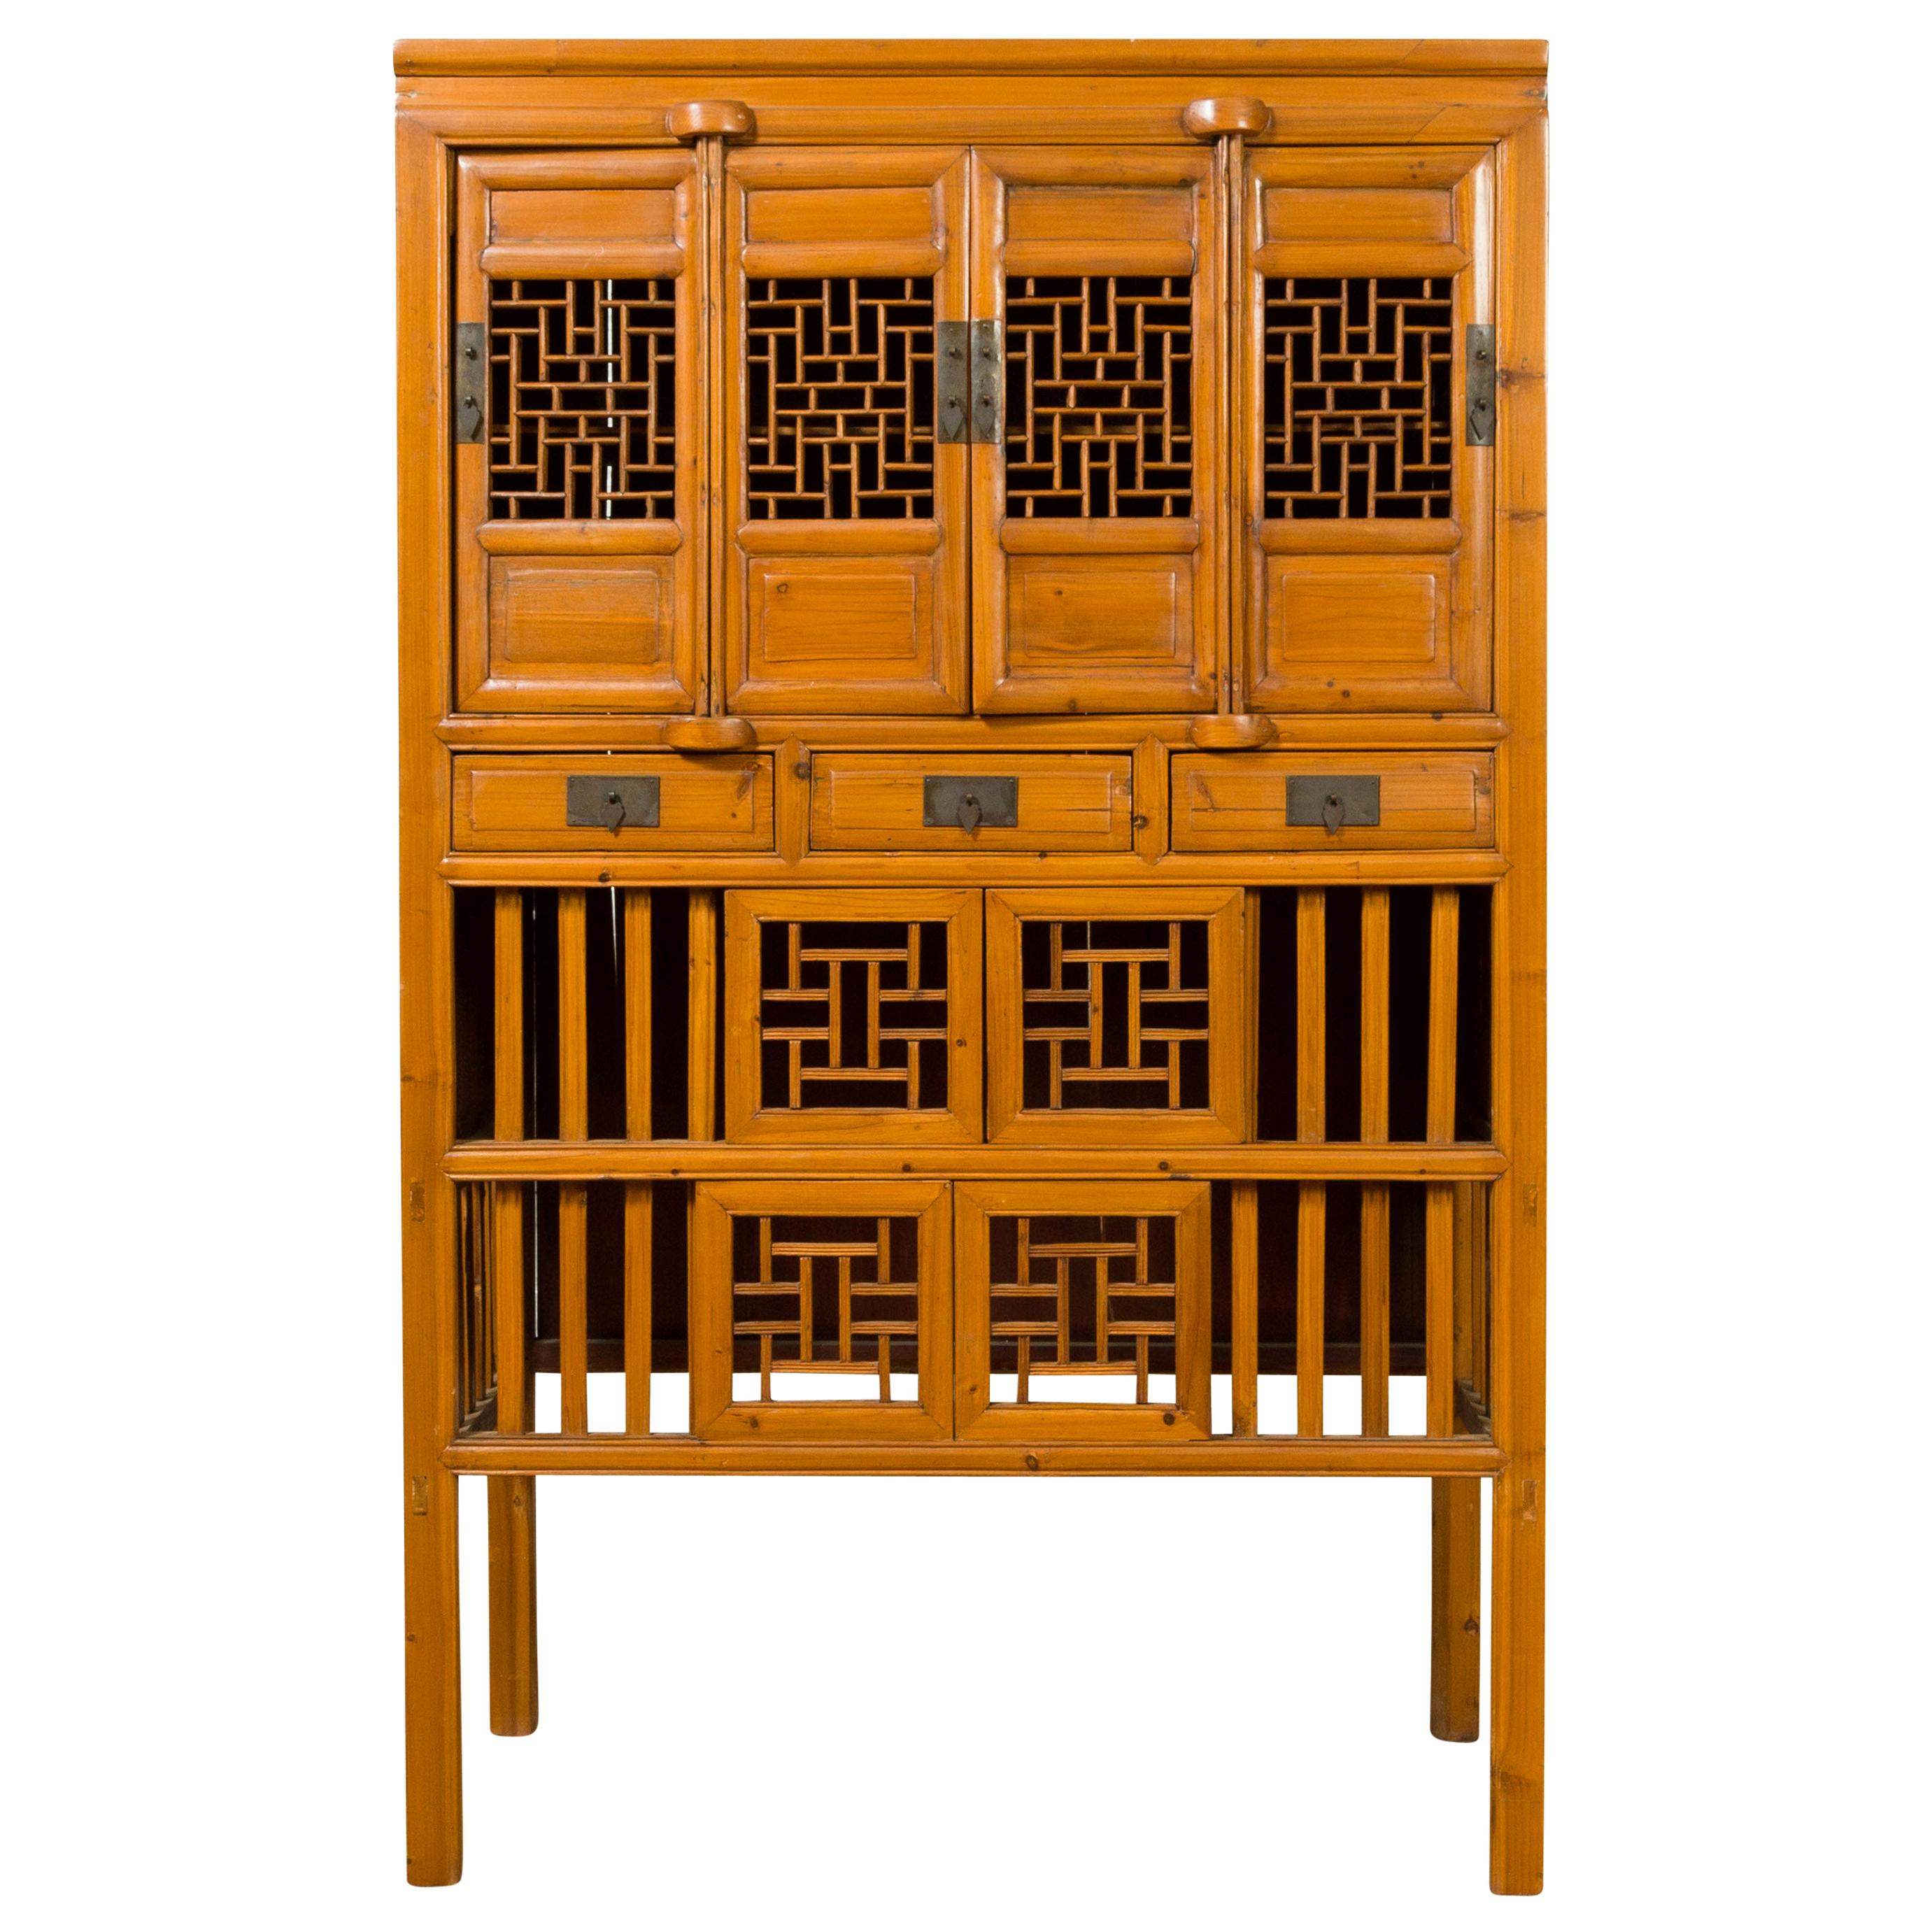 Chinese Qing Dynasty Elm Cabinet with Fretwork Motifs, Doors and Sliding Panels